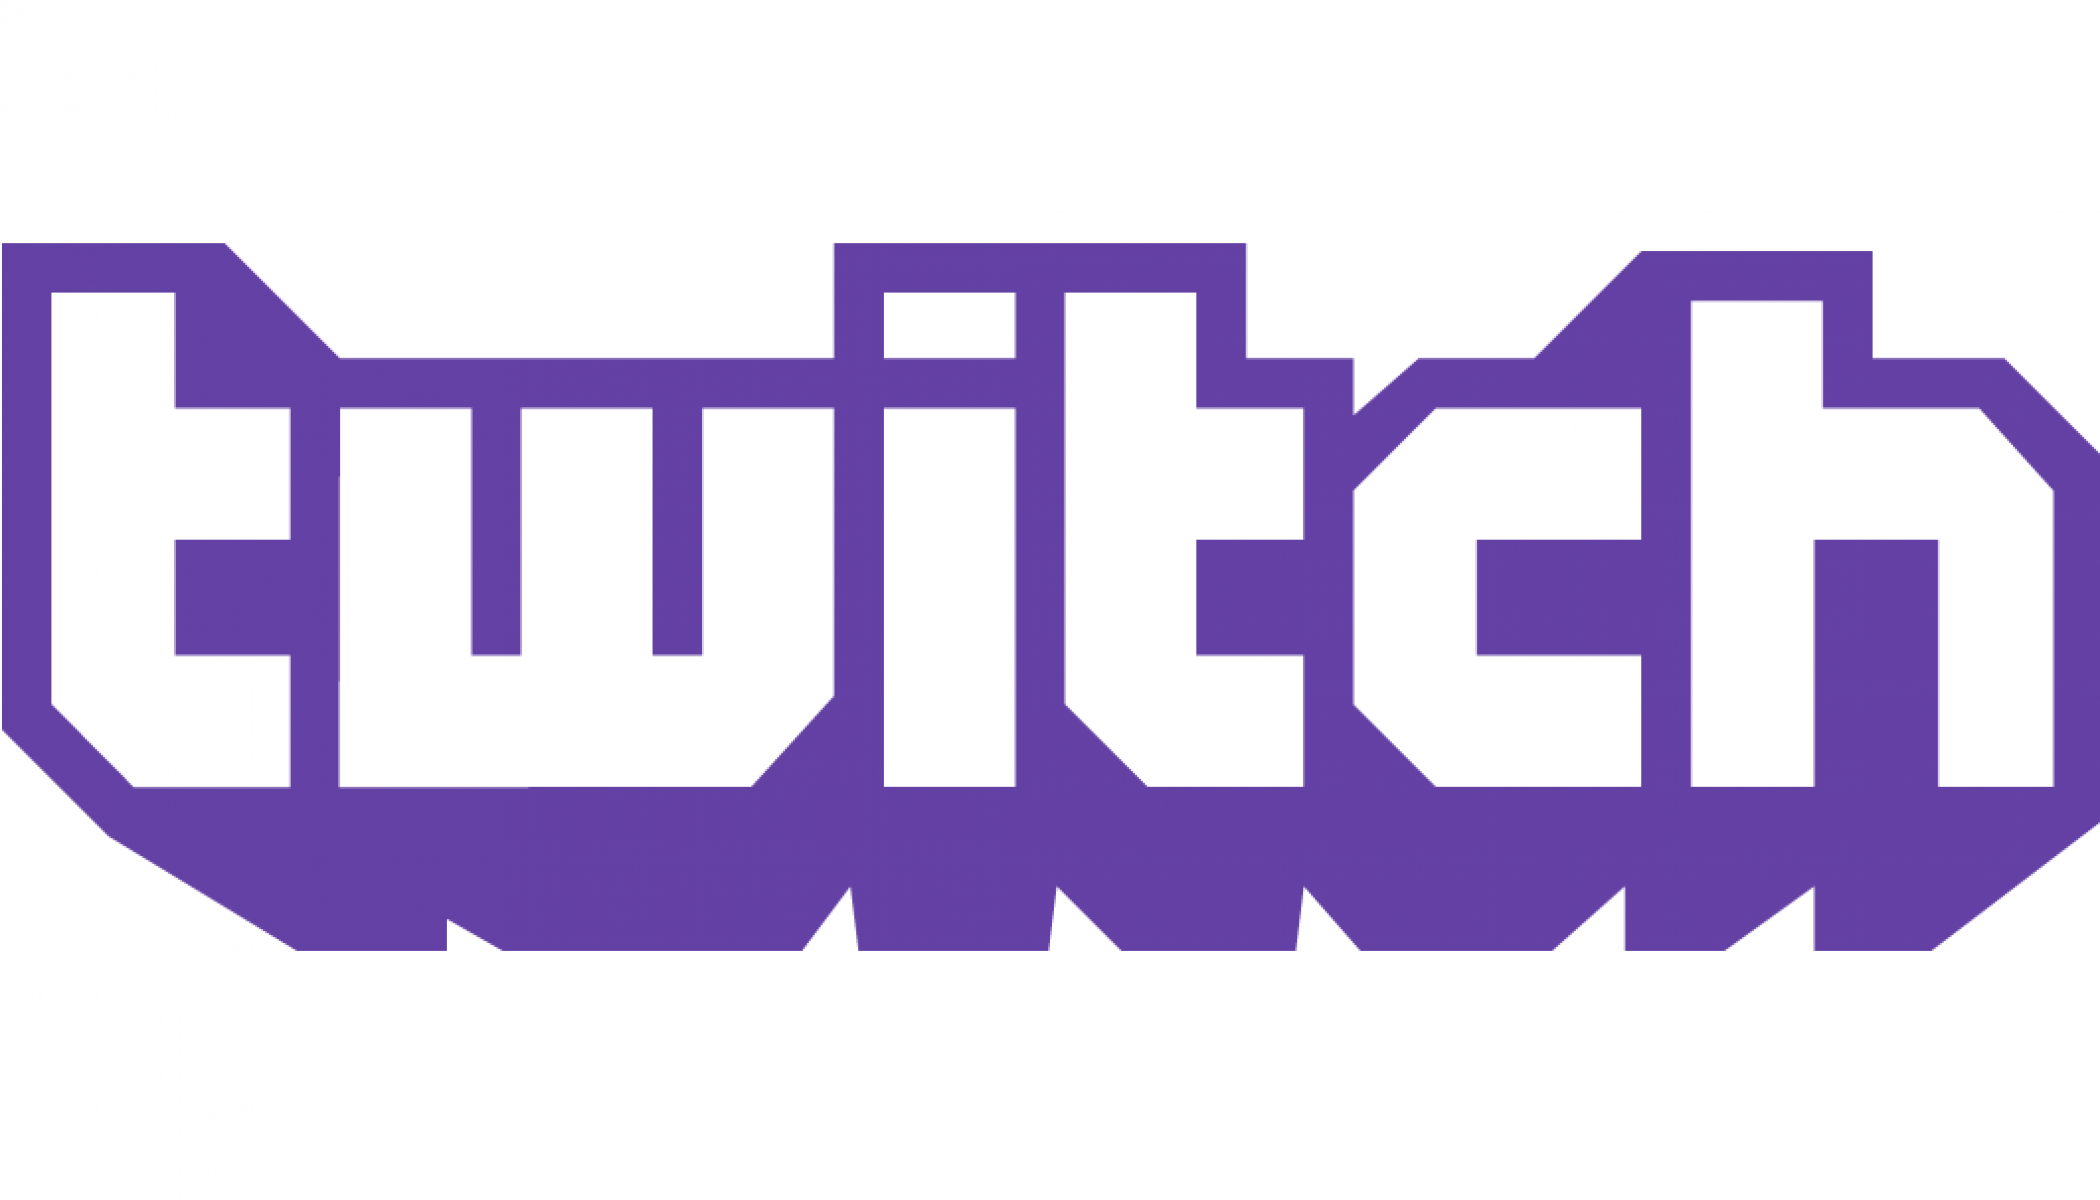 Twitch to livestream Overwatch League matches until 2020